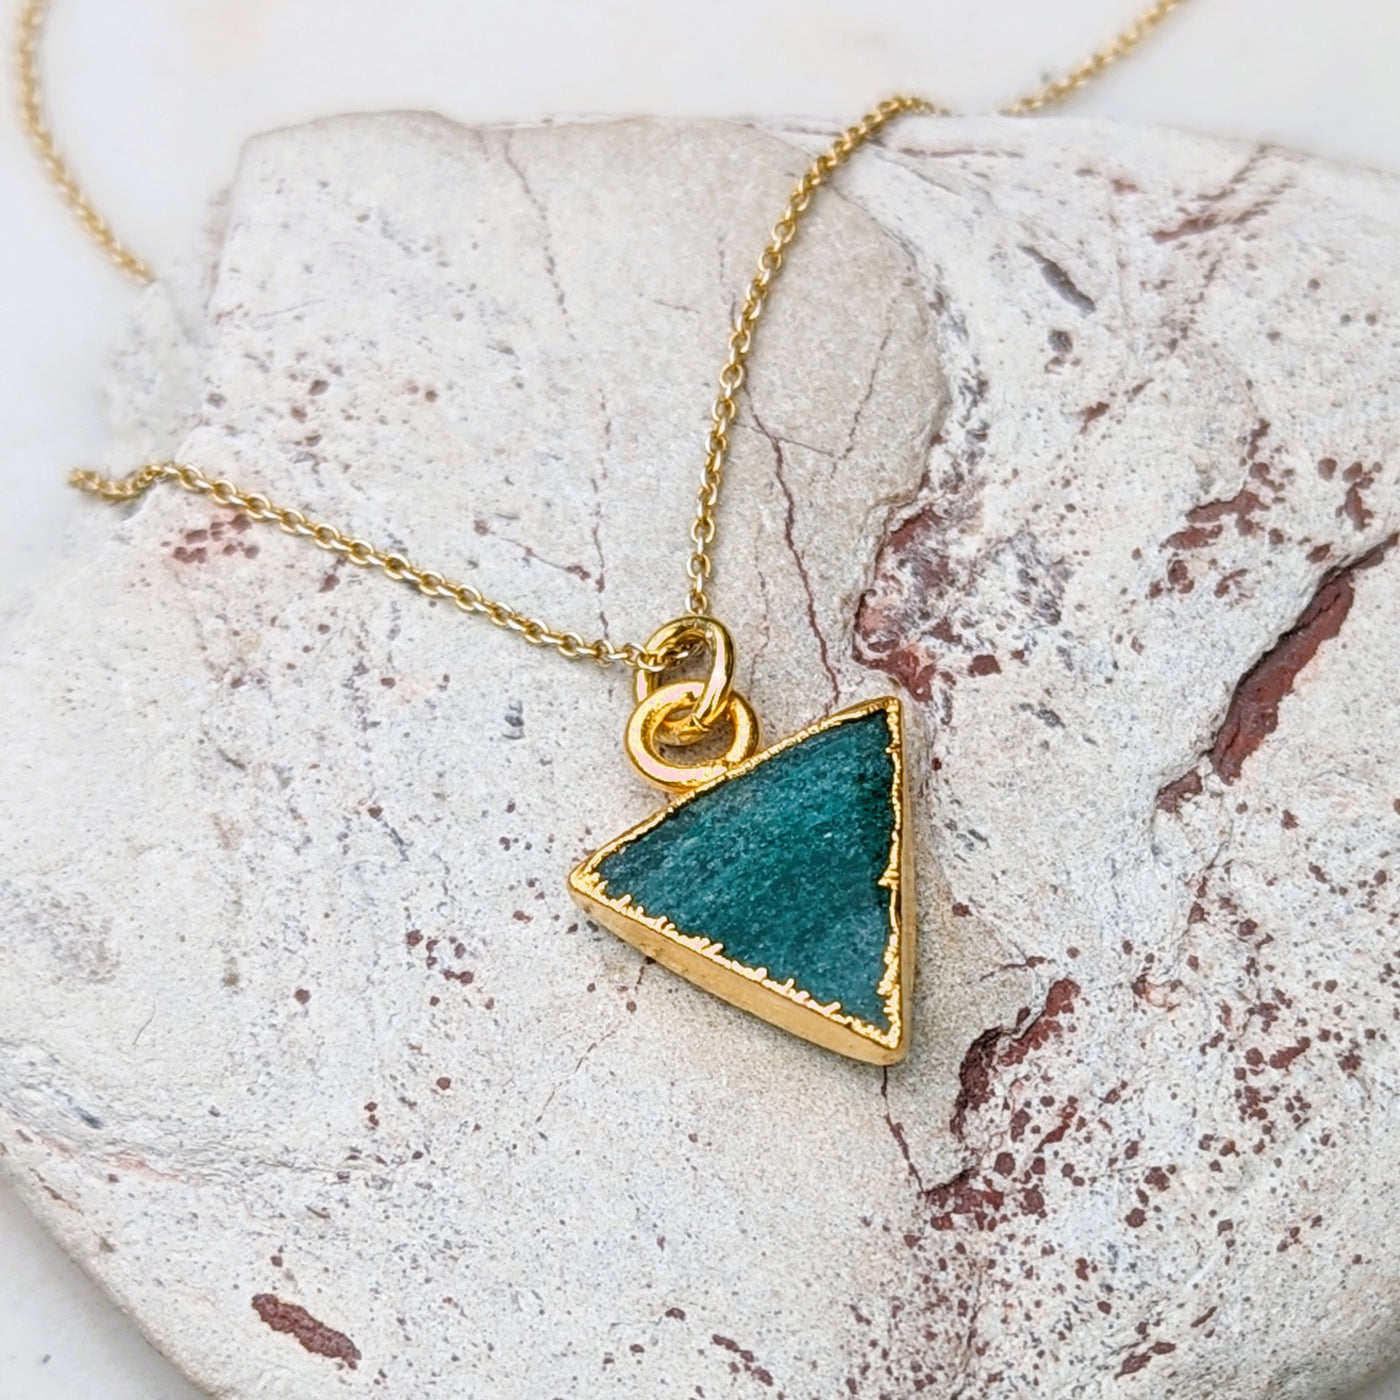 gold plated sterling silver green aventurine triangular charm pendant necklace